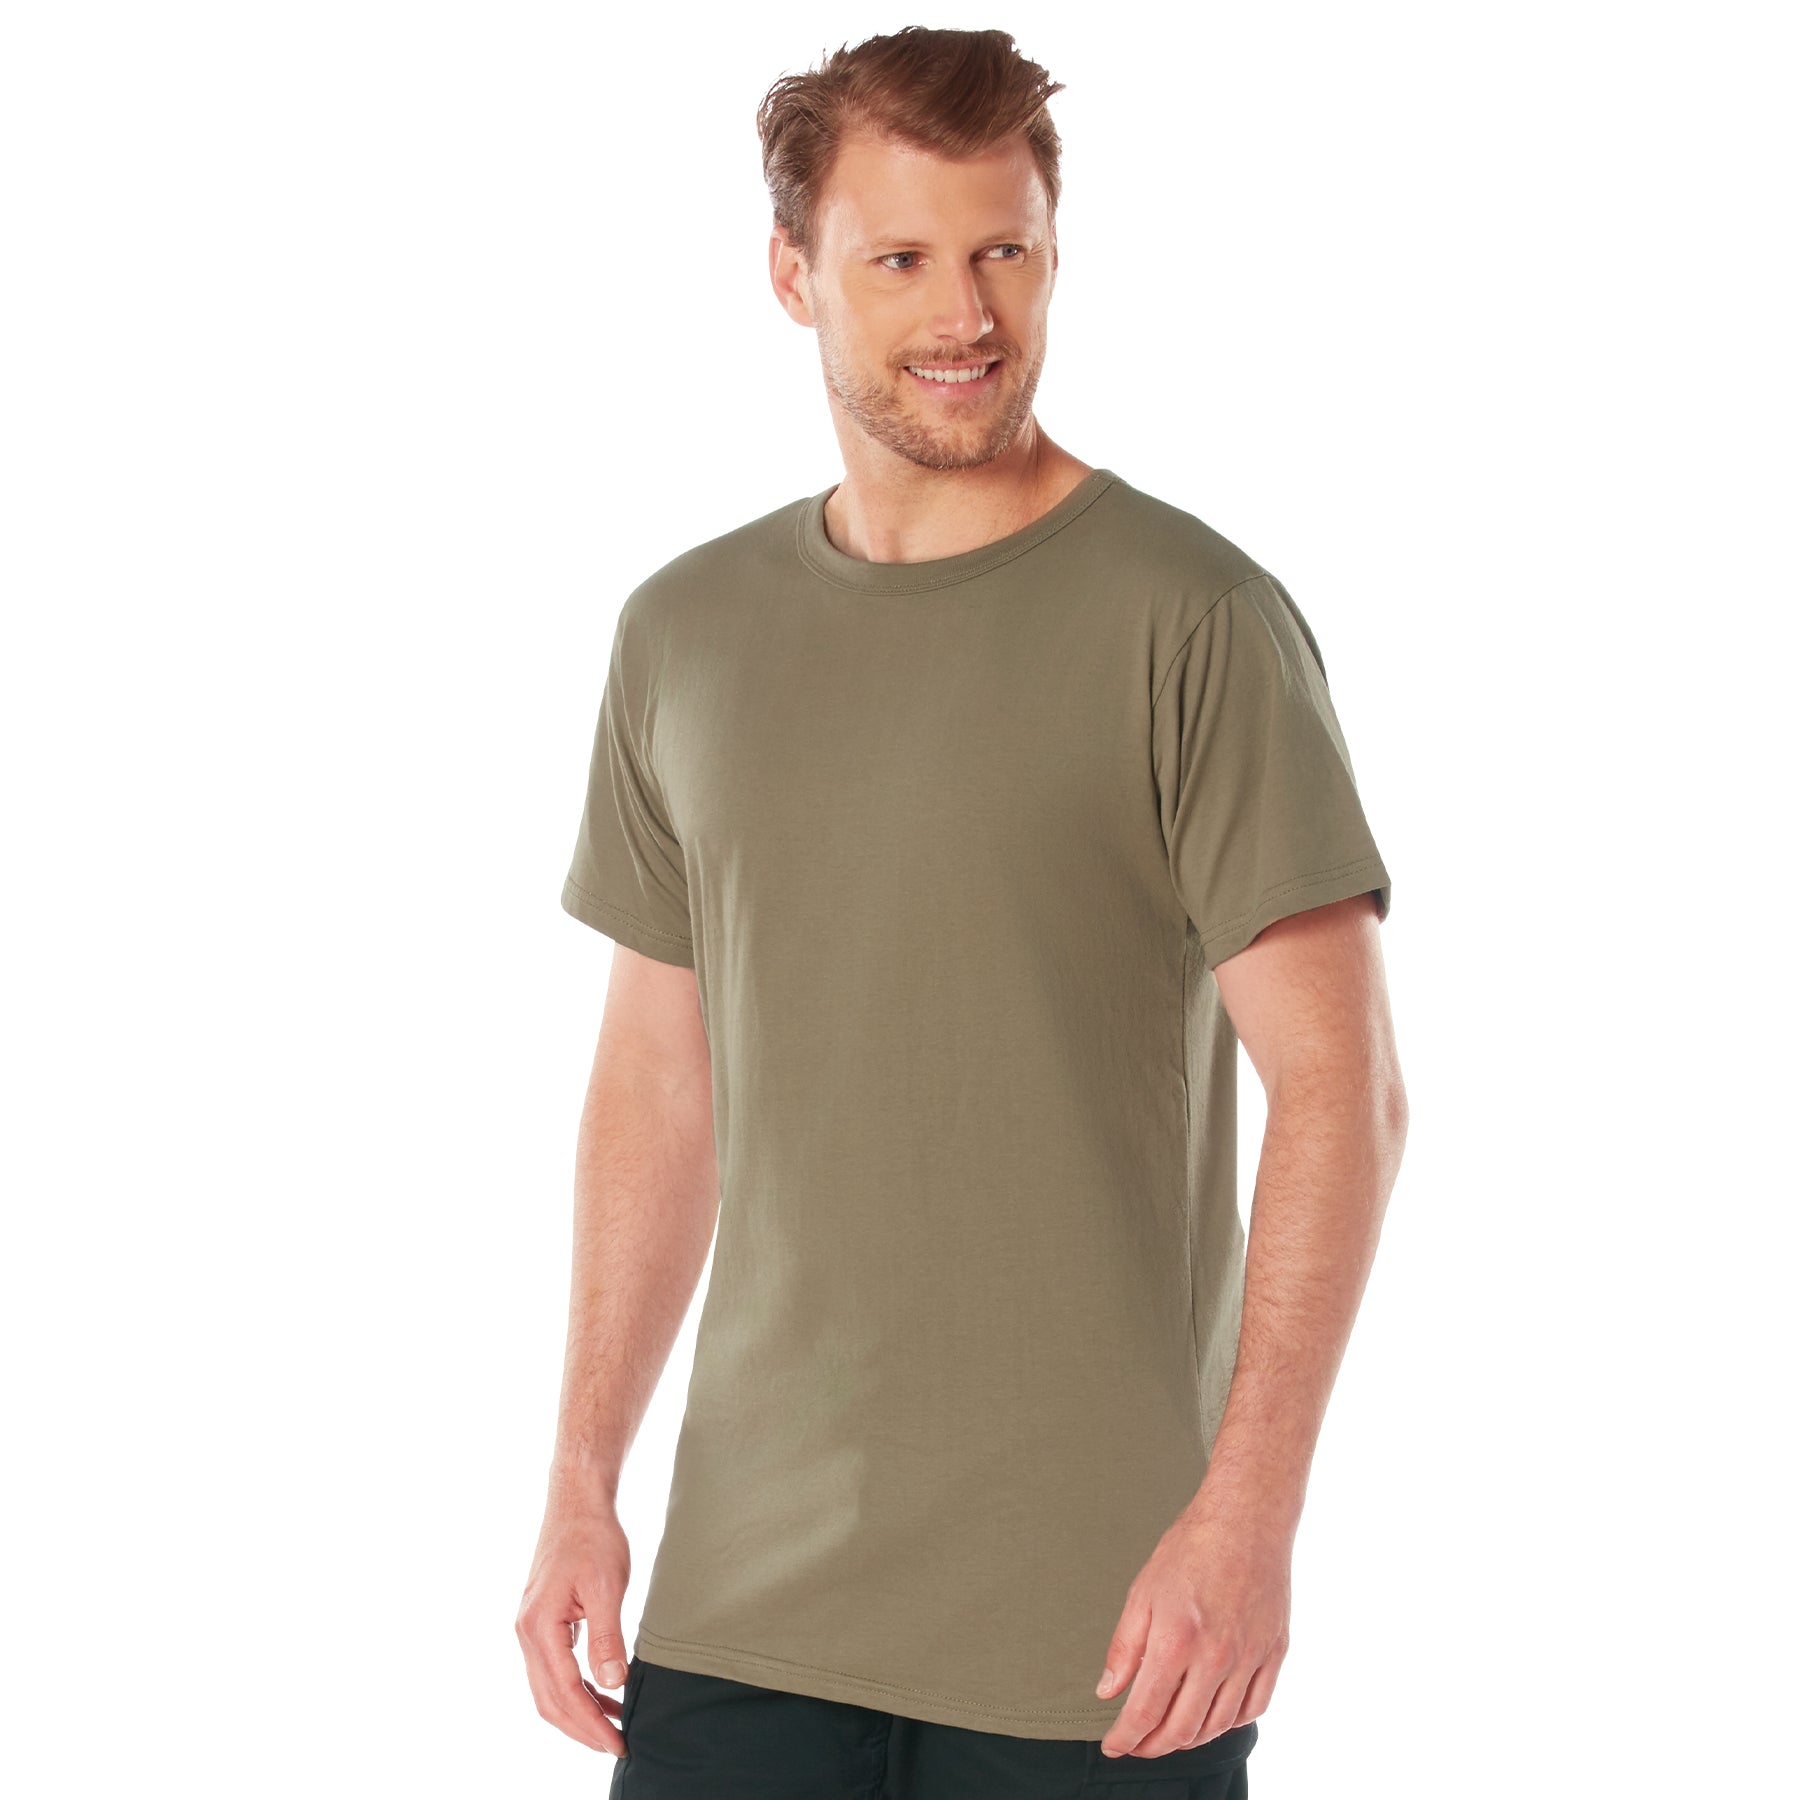 [AR 670-1][Military] Cotton T-Shirts Coyote Brown AR 670-1